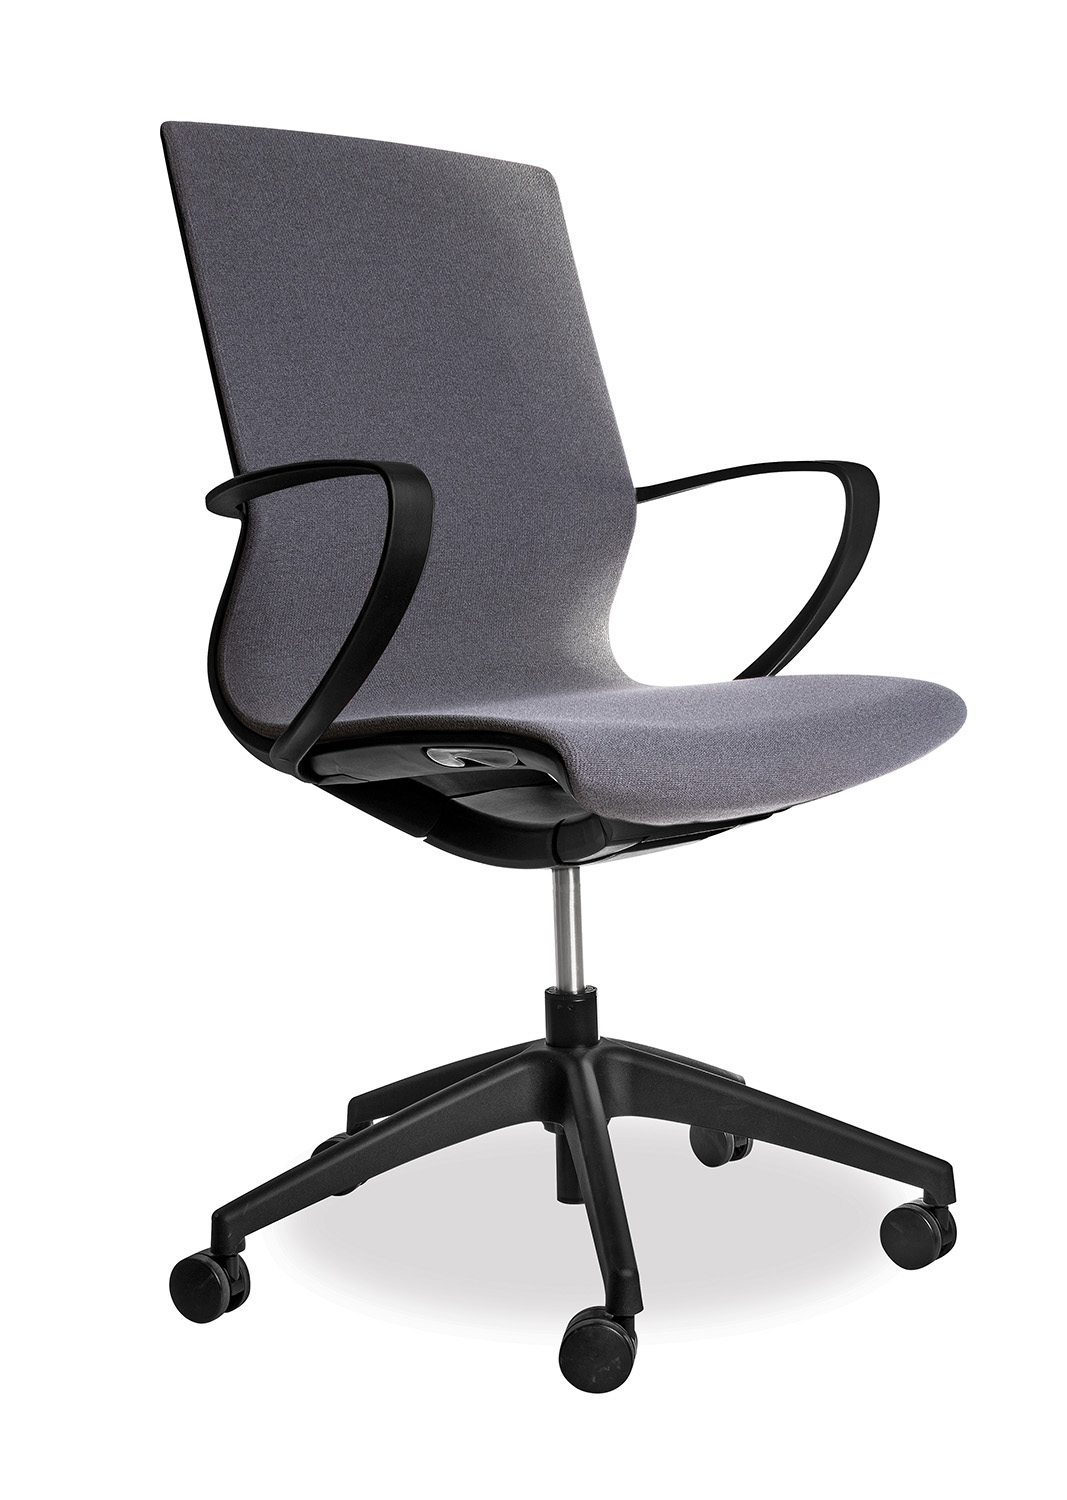 Cheap office chairs at an amazing price and top quality.